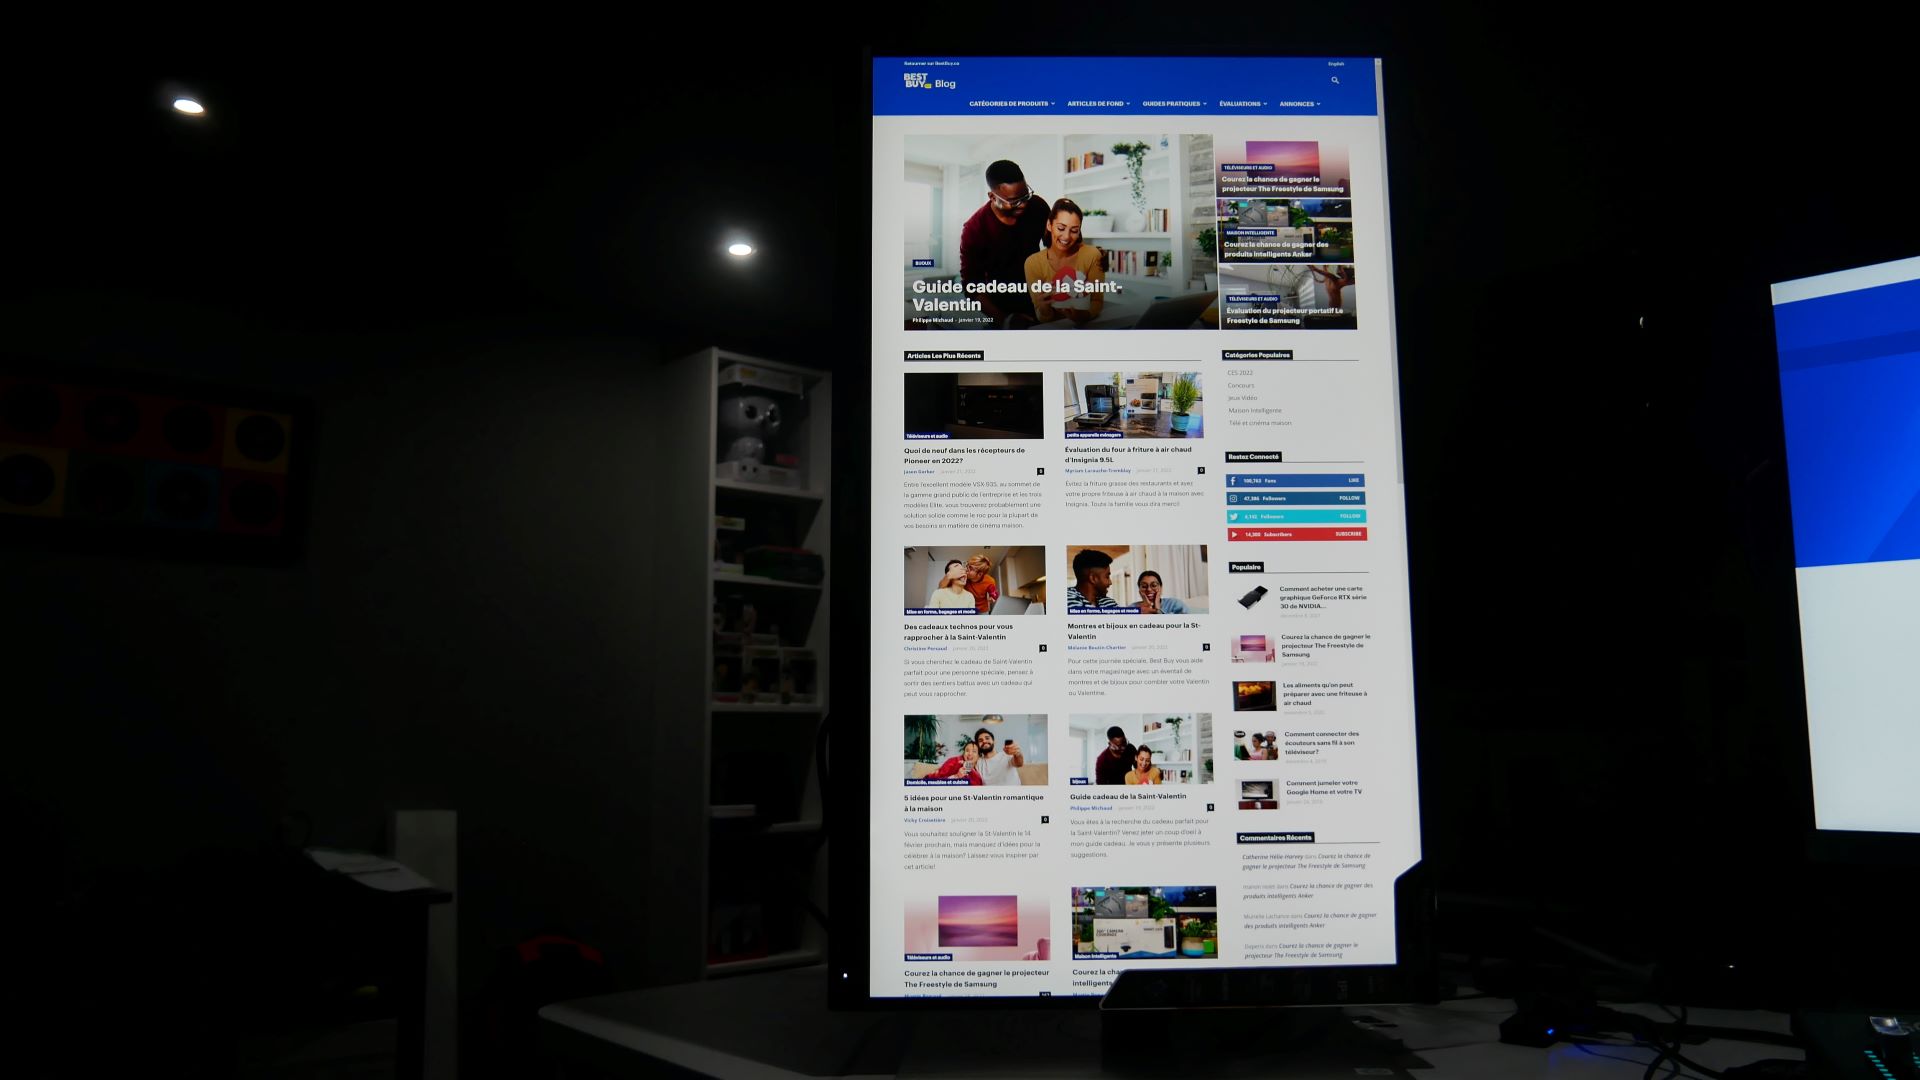 Image of ProArtDisplay monitor from Asus vertical mode with Best Buy Blog website